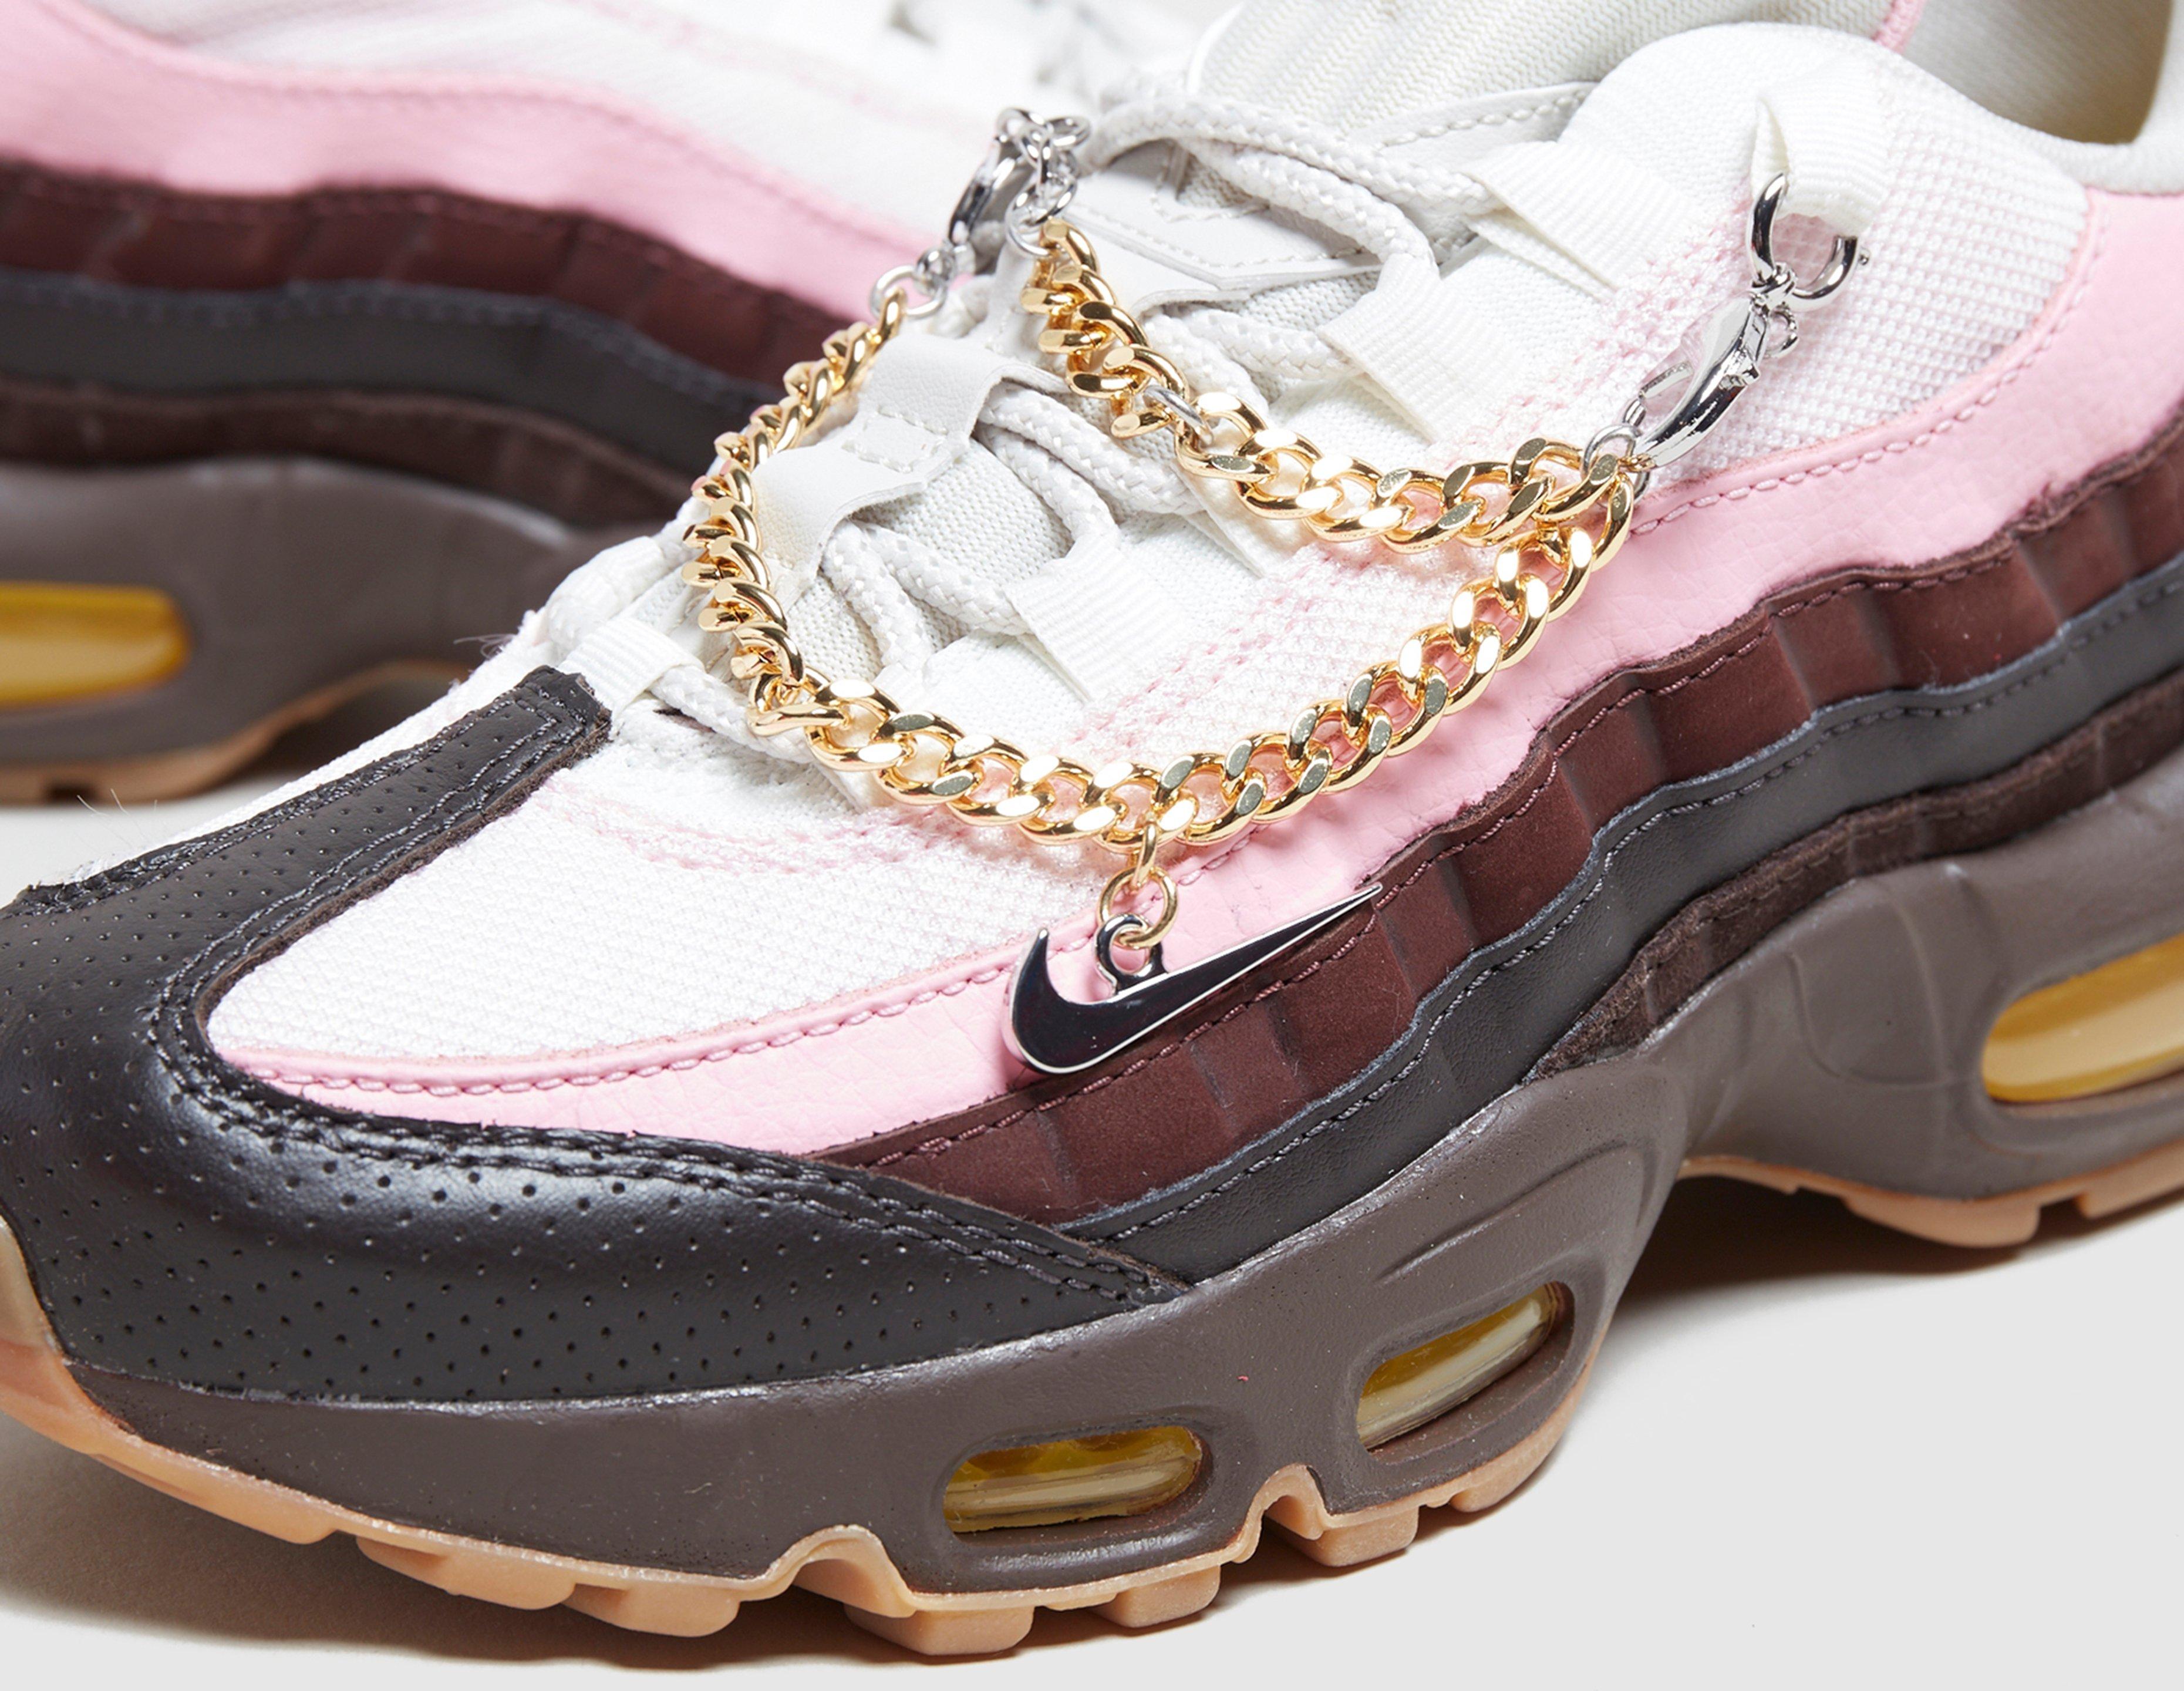 95 air max for women